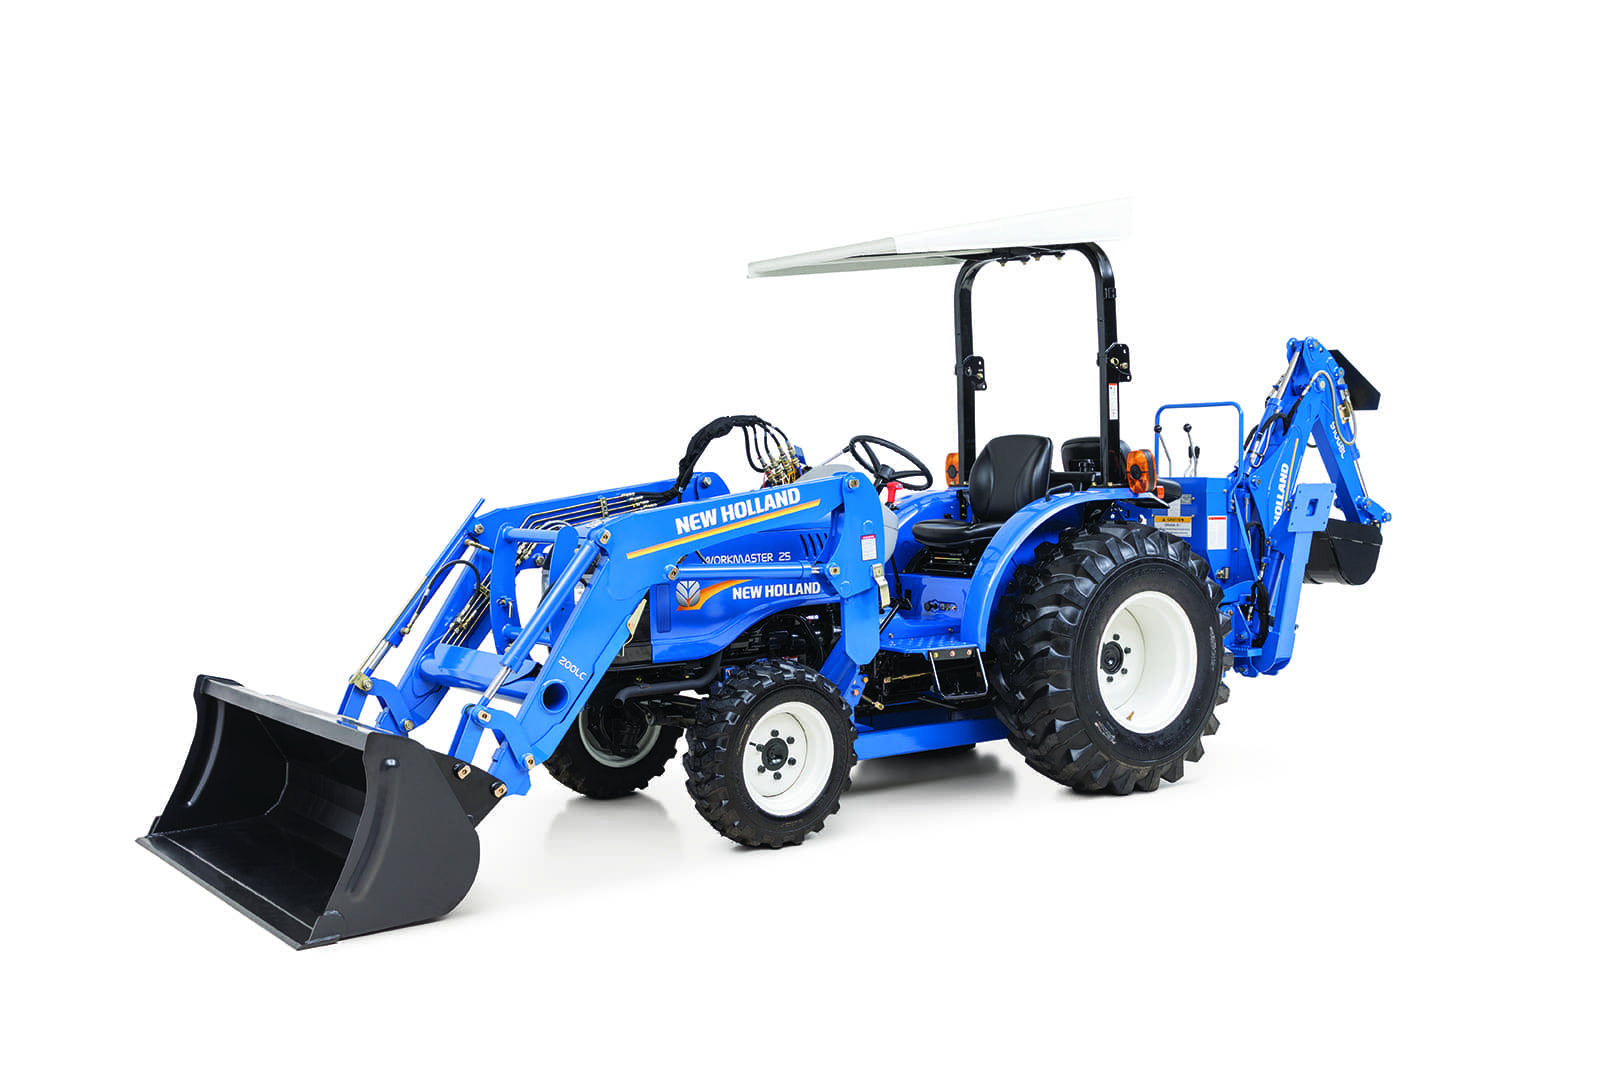 New Holland Workmaster 25 Compact Tractor, HST Loader, 951138708191